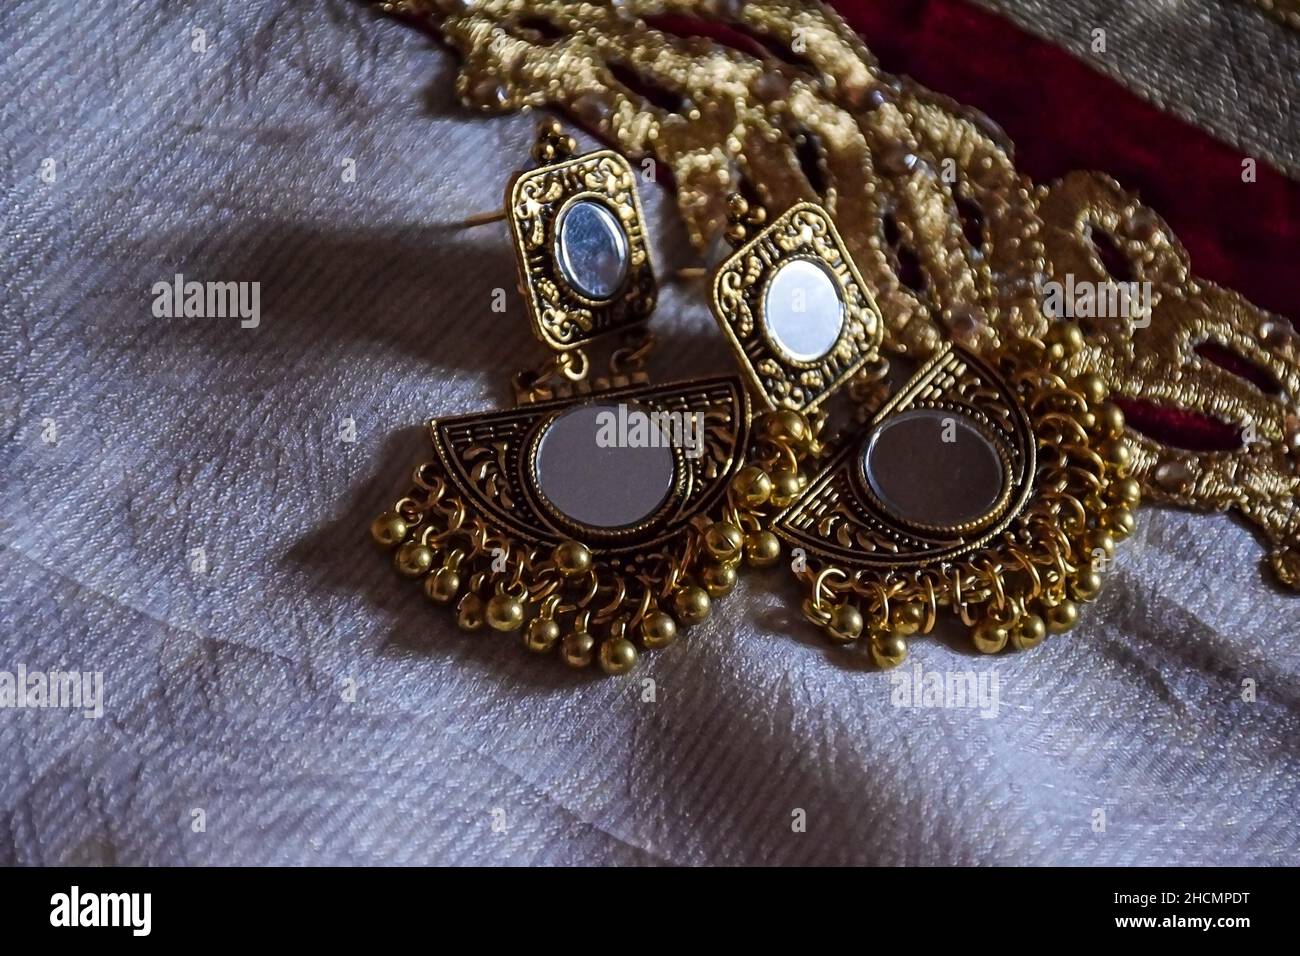 Stock photo of beautiful Indian jewelry golden mirror zumka or earring on white background.traditional Indian trendy jewelry, focus on object at Banga Stock Photo